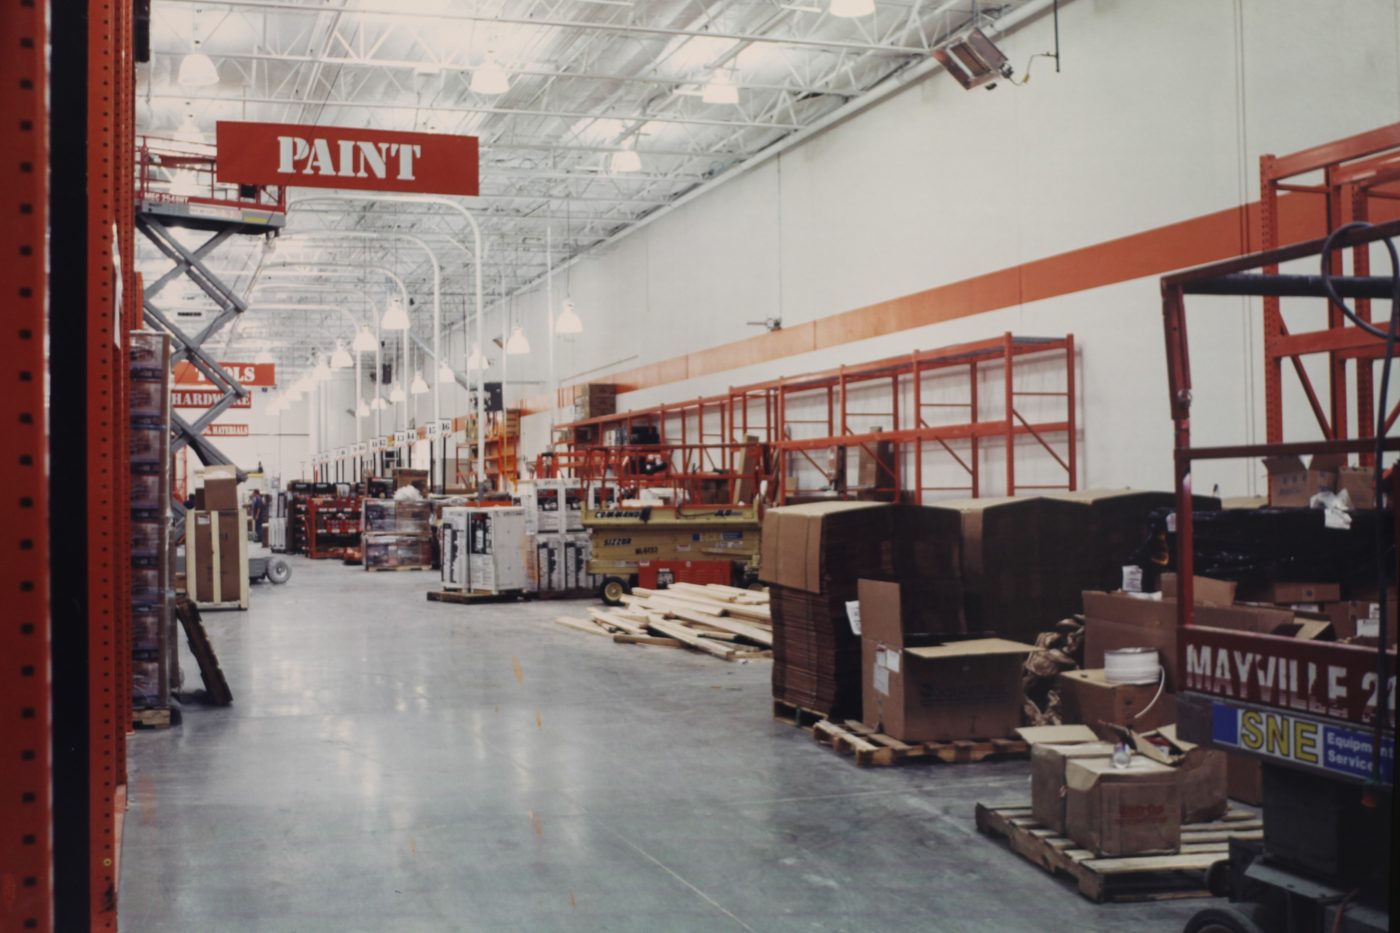 Commercial Painting Portfolio | Home Depot | Bruin Painting Company in Temecula, CA